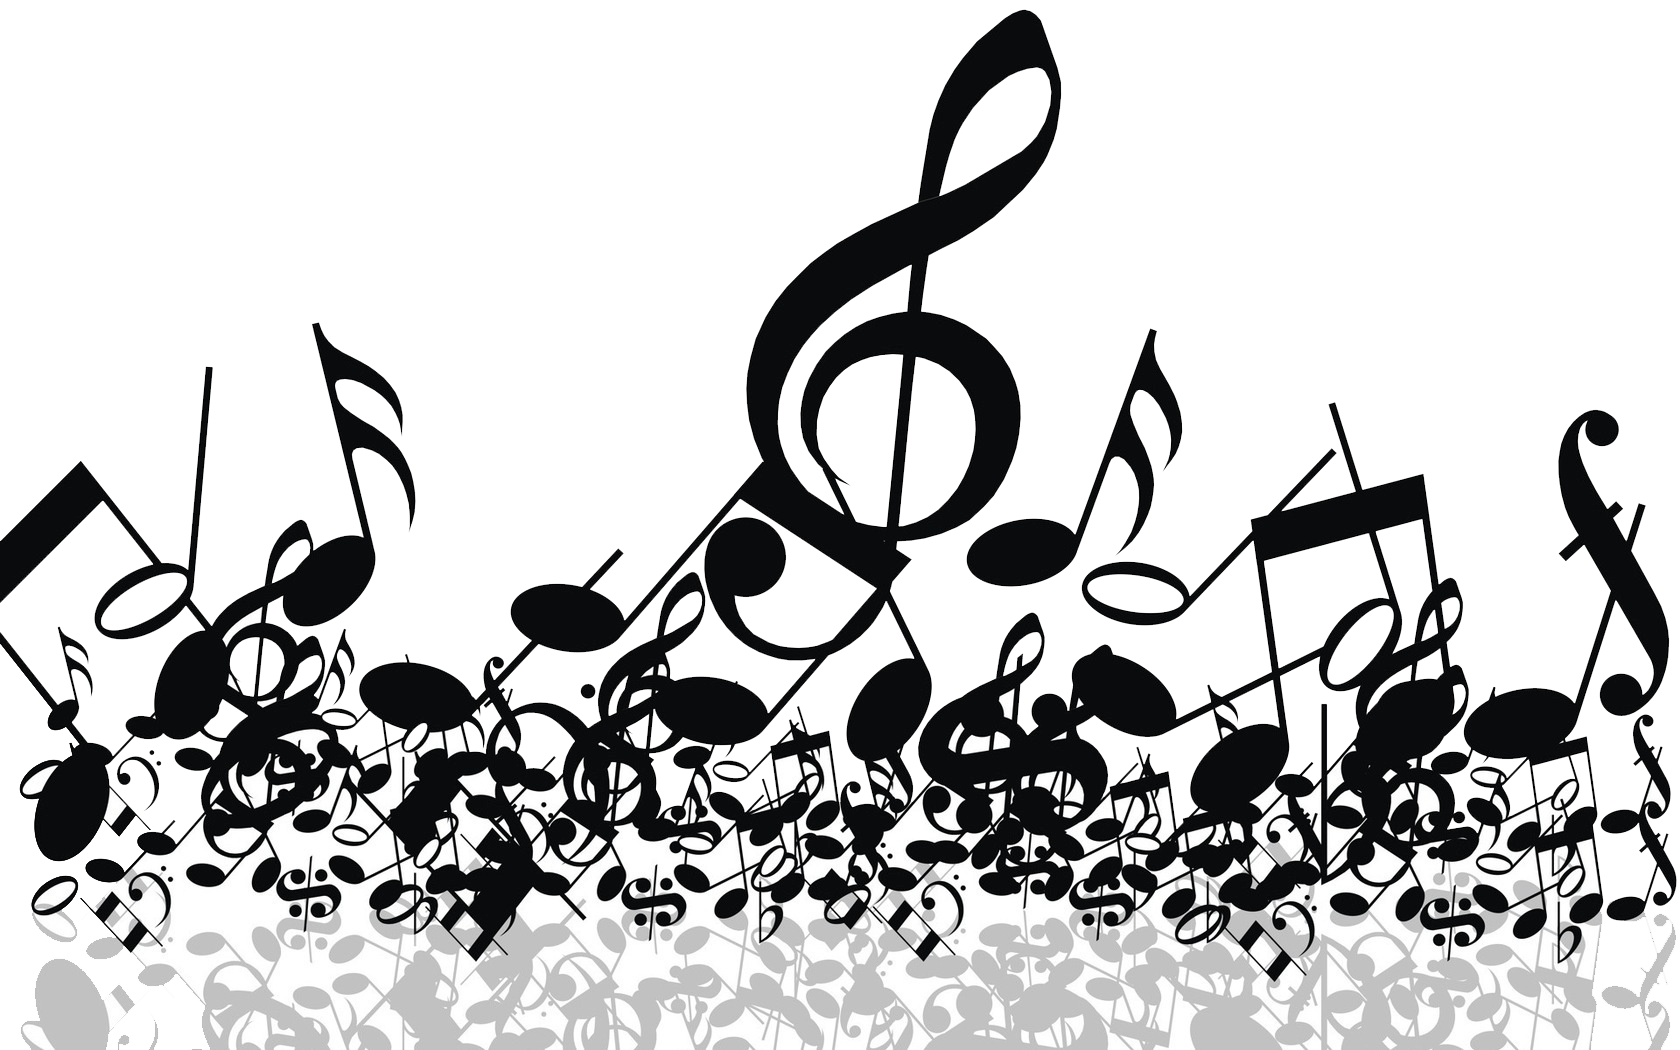 orchestra clipart community band